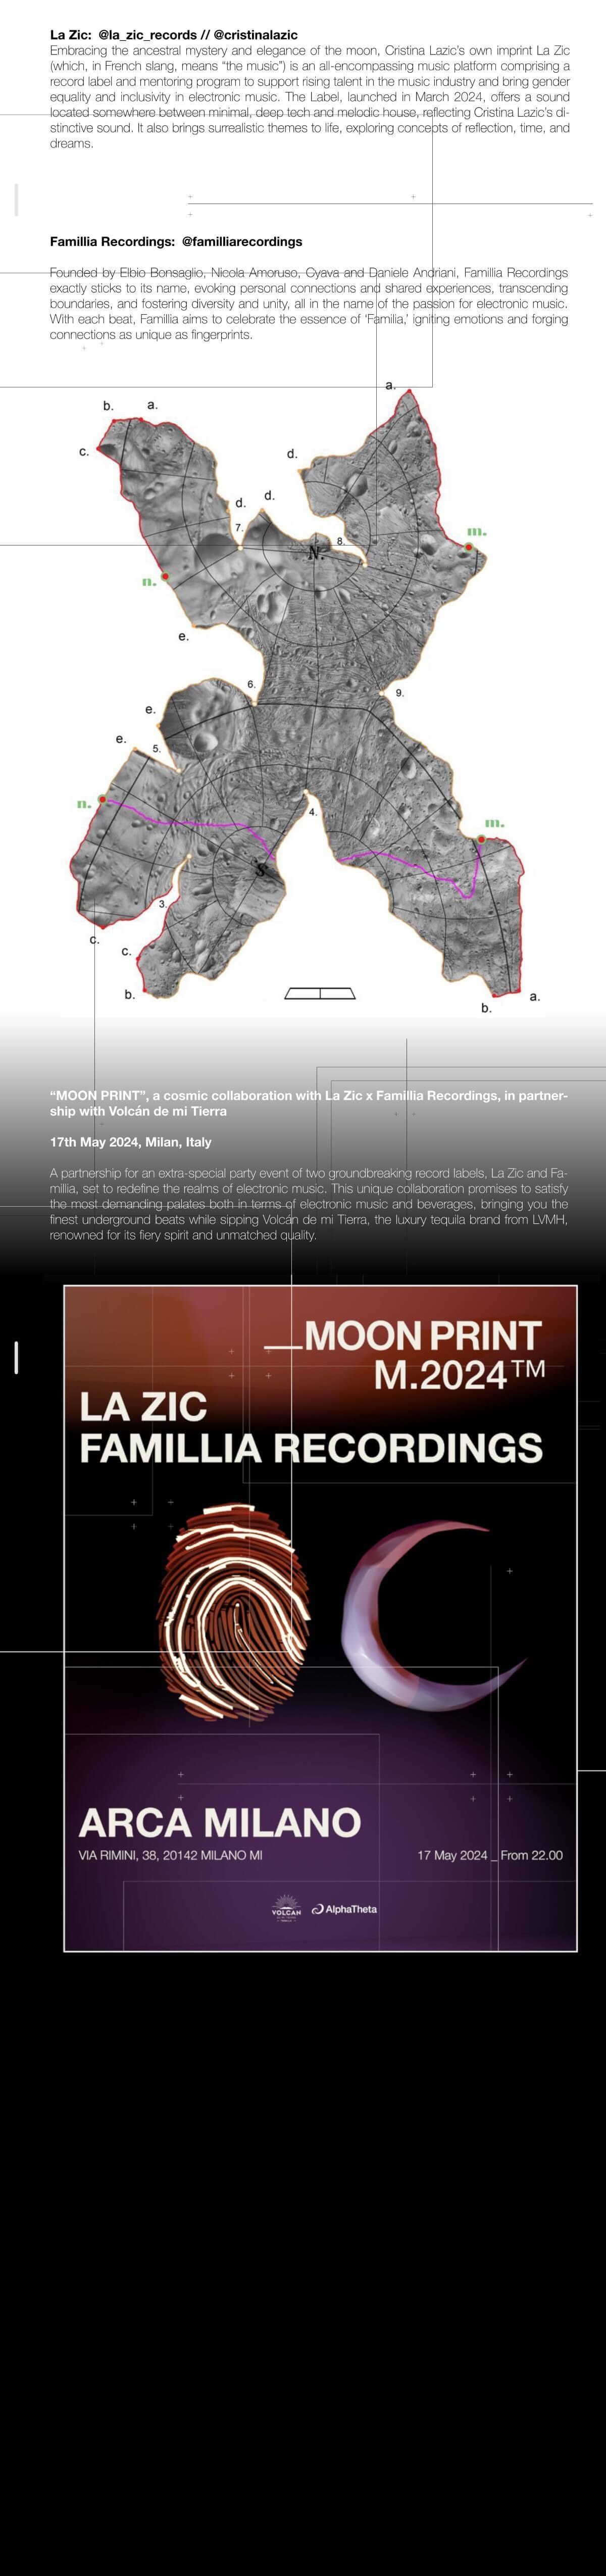 
			La Zic:
			Embracing the ancestral mystery and elegance of the moon, Cristina Lazic’s own imprint La Zic
			(which, in French slang, means “the music”) is an all-encompassing music platform comprising a
			record label and mentoring program to support rising talent in the music industry and bring gender
			equality and inclusivity in electronic music. The Label, launched in March 2024, offers a sound
			located somewhere between minimal, deep tech and melodic house, reflecting Cristina Lazic’s distinctive sound. It also brings surrealistic themes to life, exploring concepts of reflection, time, and
			dreams.

			Famillia Recordings:
			Founded by Elbio Bonsaglio, Nicola Amoruso, Cyava and Daniele Andriani, Famillia Recordings
			exactly sticks to its name, evoking personal connections and shared experiences, transcending
			boundaries, and fostering diversity and unity, all in the name of the passion for electronic music.
			With each beat, Famillia aims to celebrate the essence of ‘Familia,’ igniting emotions and forging
			connections as unique as fingerprints.

			Volcan De Mi Tierra presents: “MOON PRINT”, a cosmic collaboration with La Zic x
			Famillia Recordings
			17th May 2024, Milan, Italy
			Volcan proudly announces an extra-special party event of two groundbreaking record labels,
            La Zic and Famillia, set to redefine the realms of electronic music. This unique collaboration
            promises to satisfy the most demanding palates both in terms of electronic music and beverages, bringing you the finest underground beats while sipping Volcan, LVMH’s tequila brand,
            renowned for its fiery spirit and unmatched quality.

            Volcan proudly announces an extra-special party event of two groundbreaking record labels, La Zic and Famillia, set to redefine the
            realms of electronic music.
		